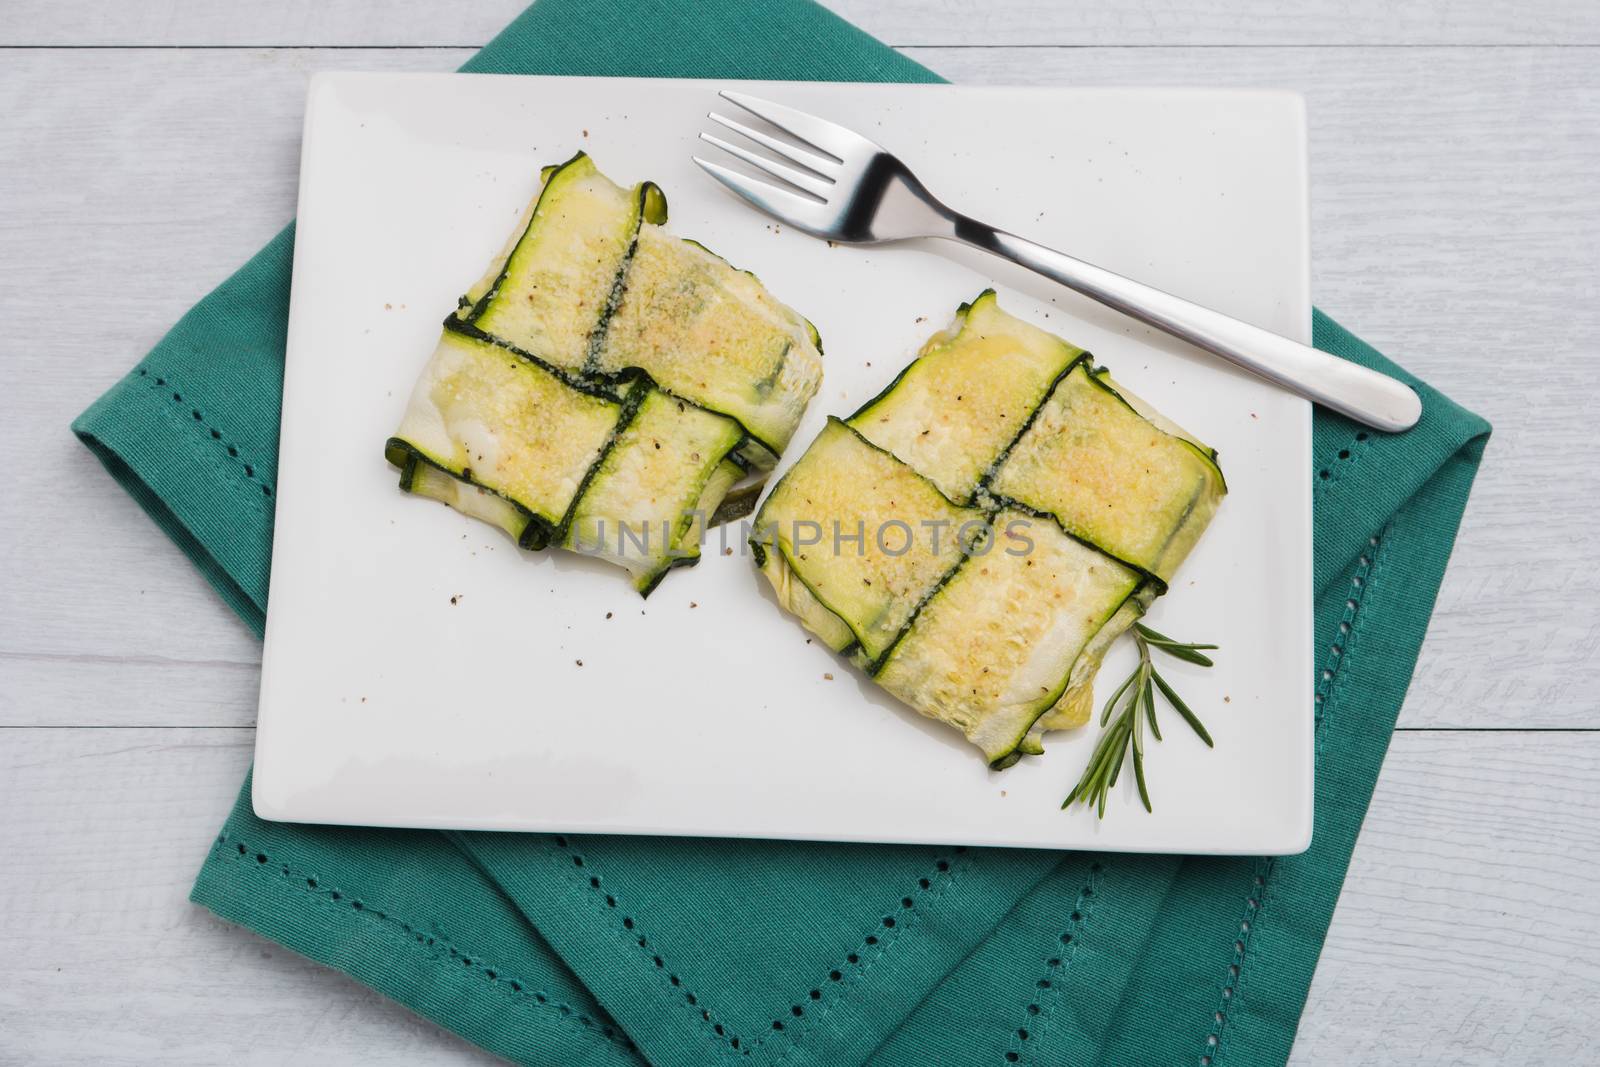 Oven baked courgettes by AnaMarques